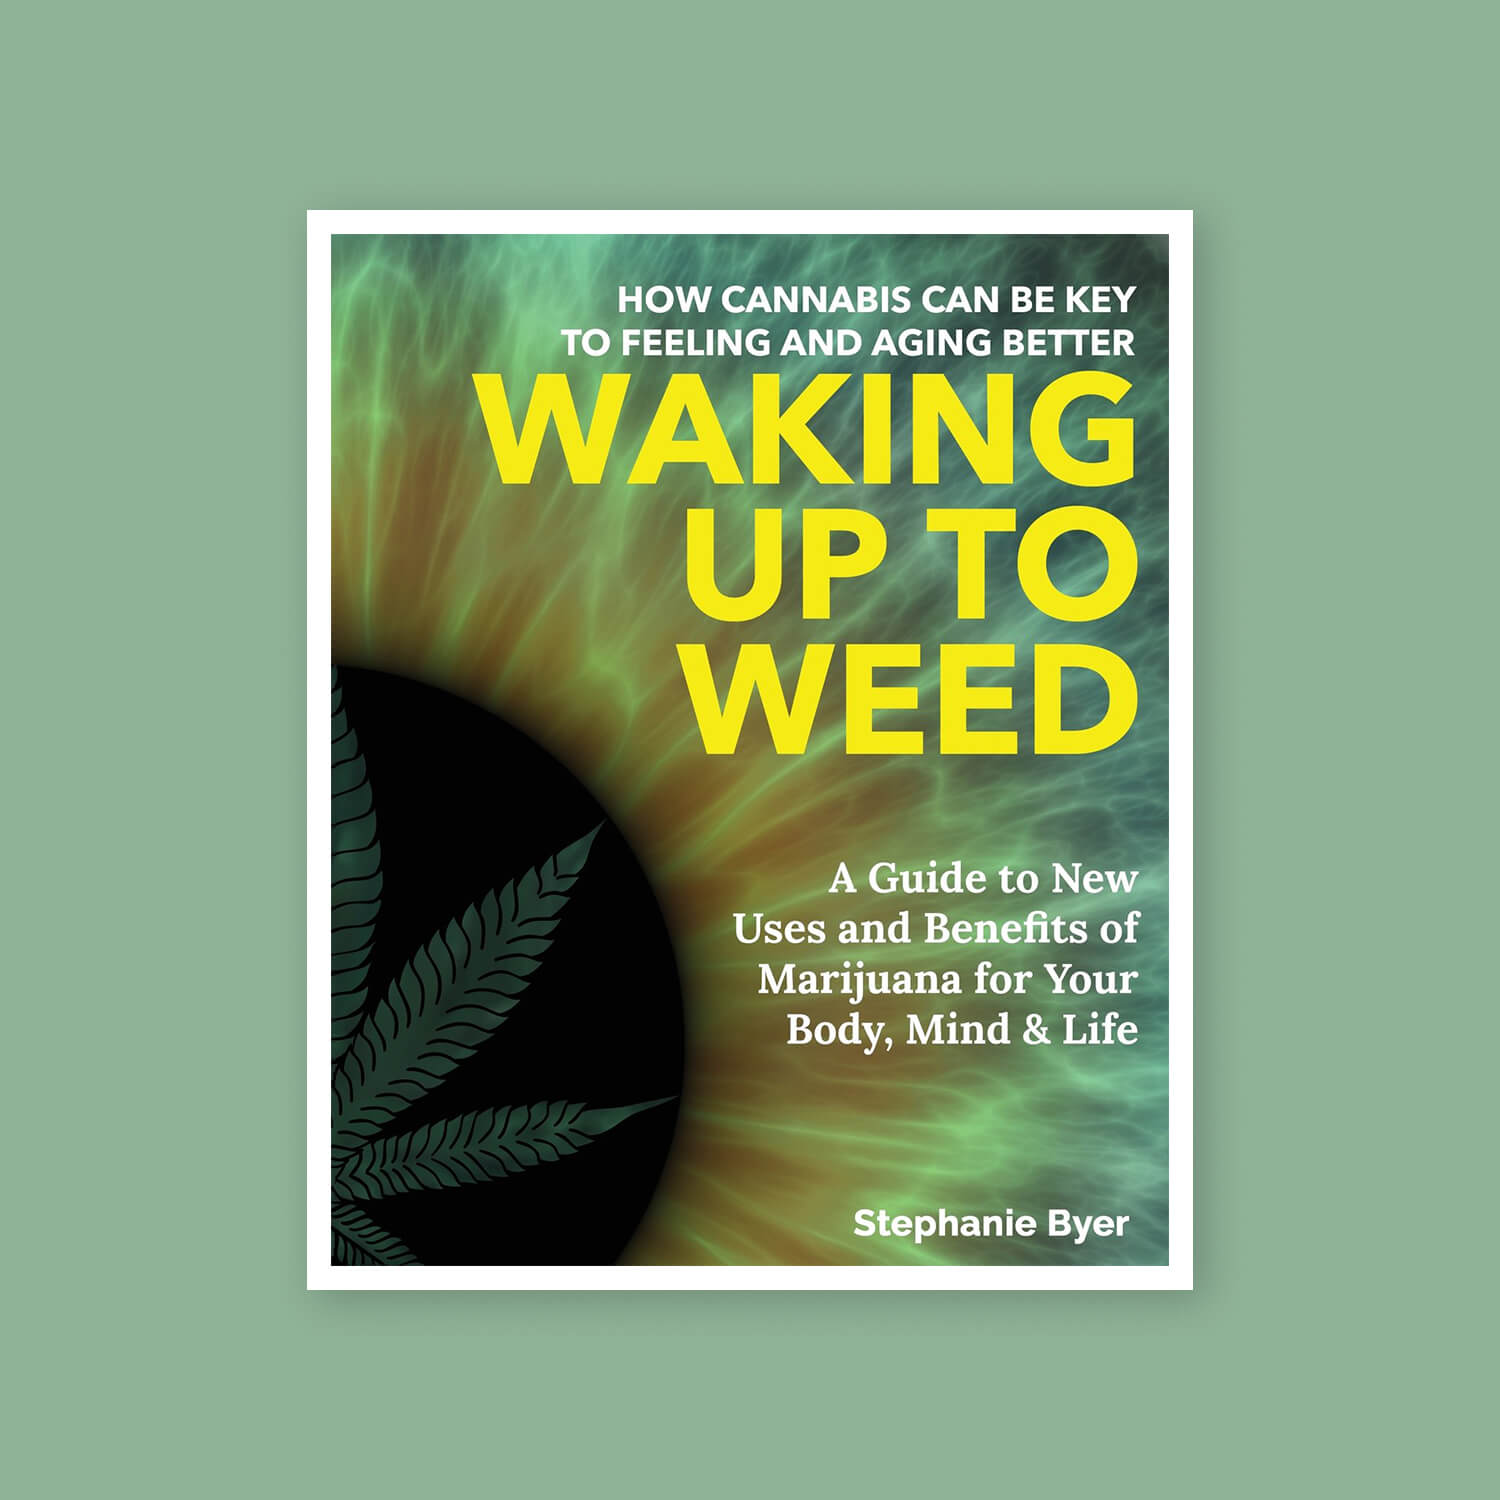 Waking up to weed - Goldleaf Bookclub